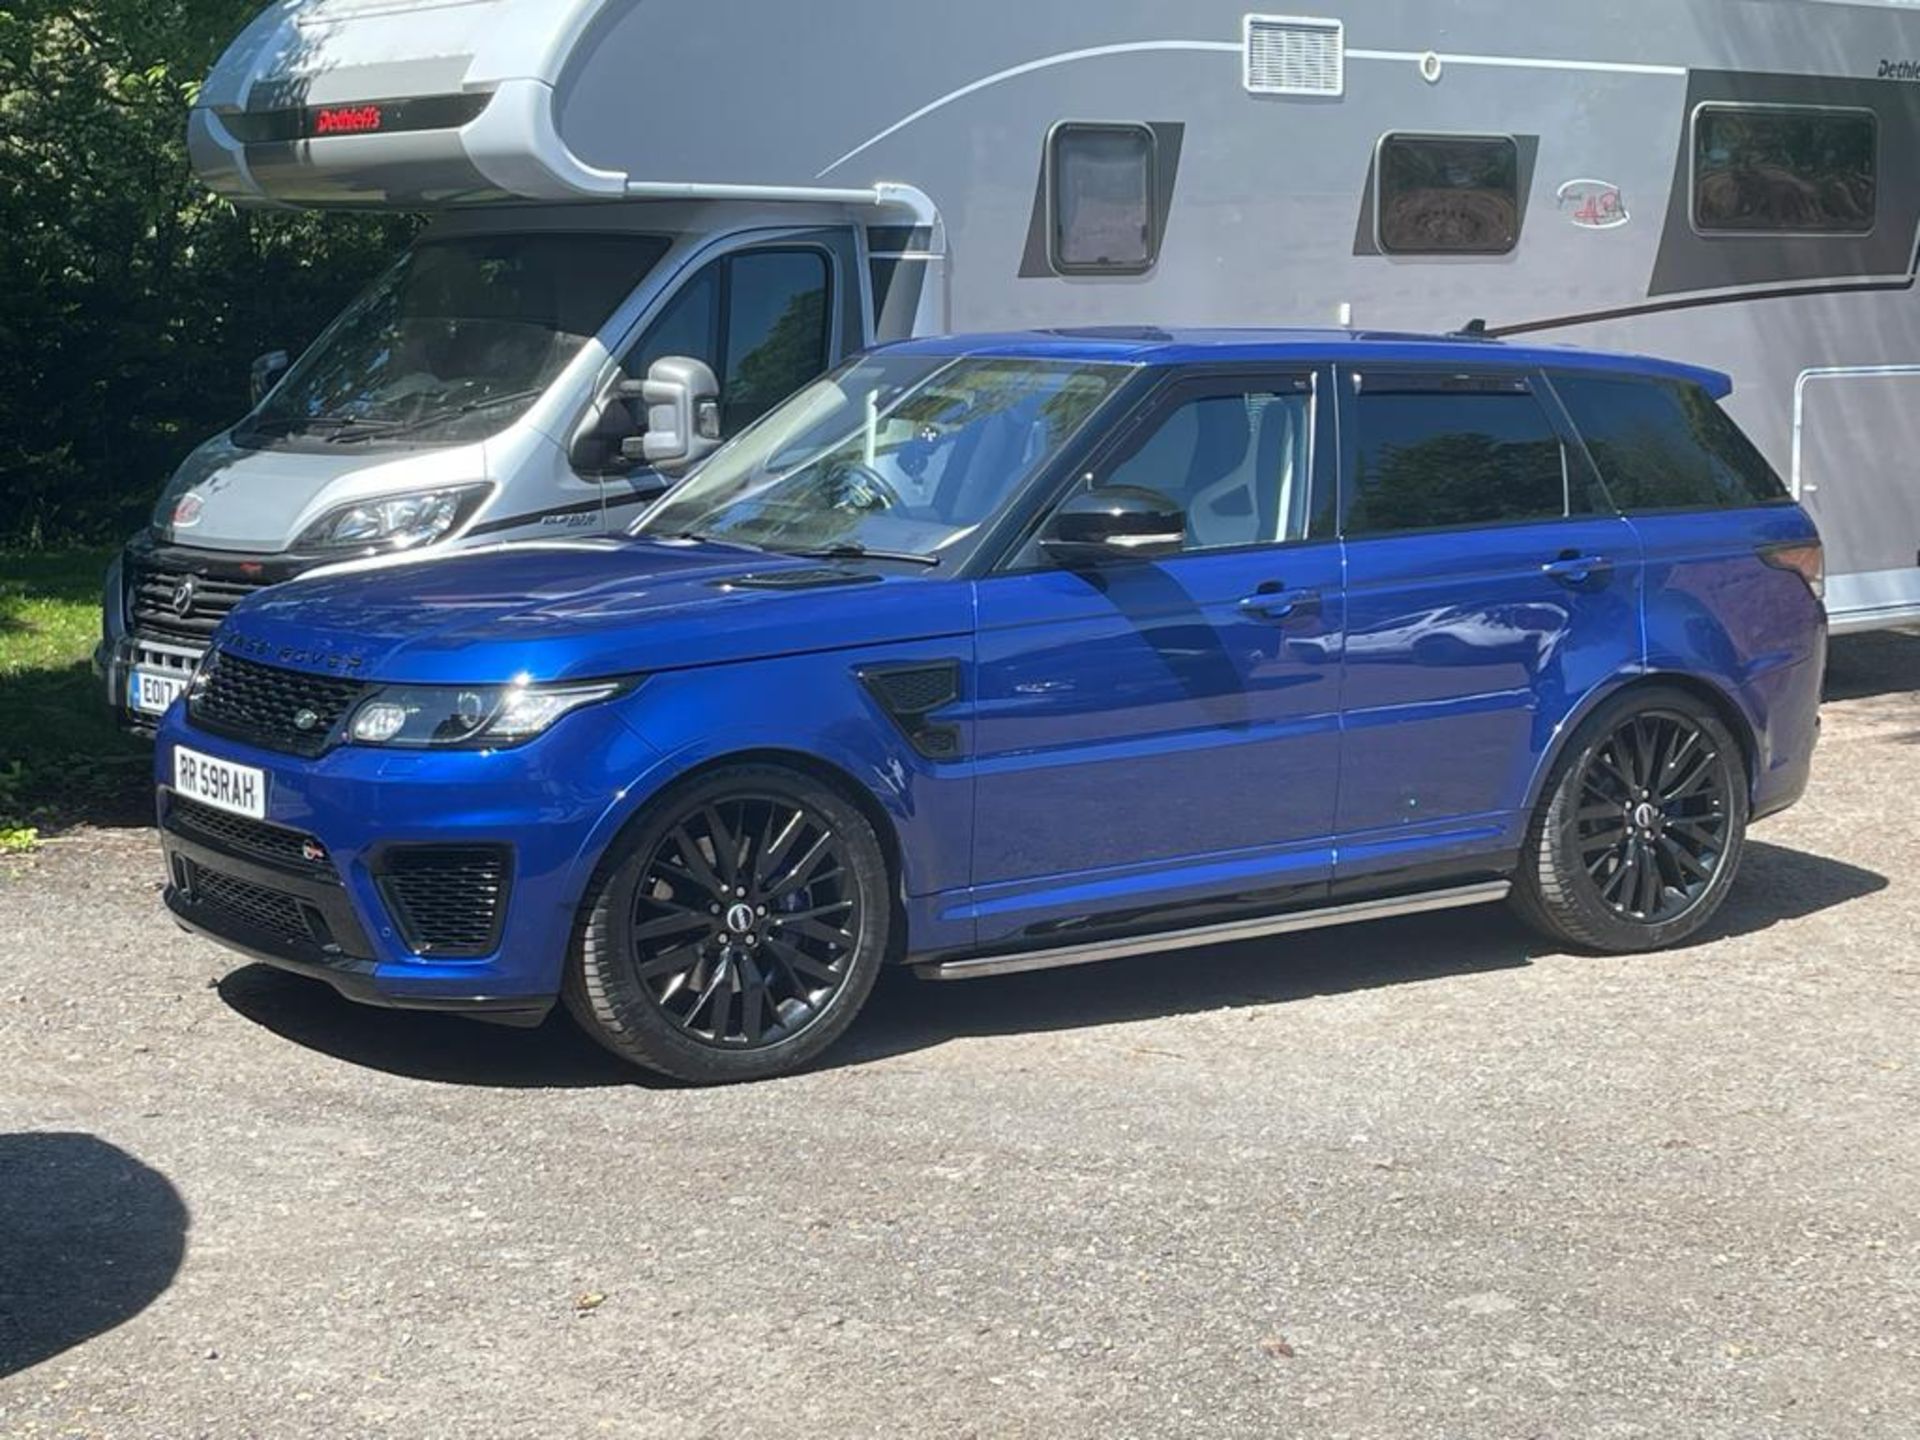 2016 RANGE ROVER SPORT SVR AUTOBIOGRAPHY DYNAMIC V8 SUPERCHARGED AUTOMATIC 5.0 550PS PETROL ENGINE - Image 2 of 28